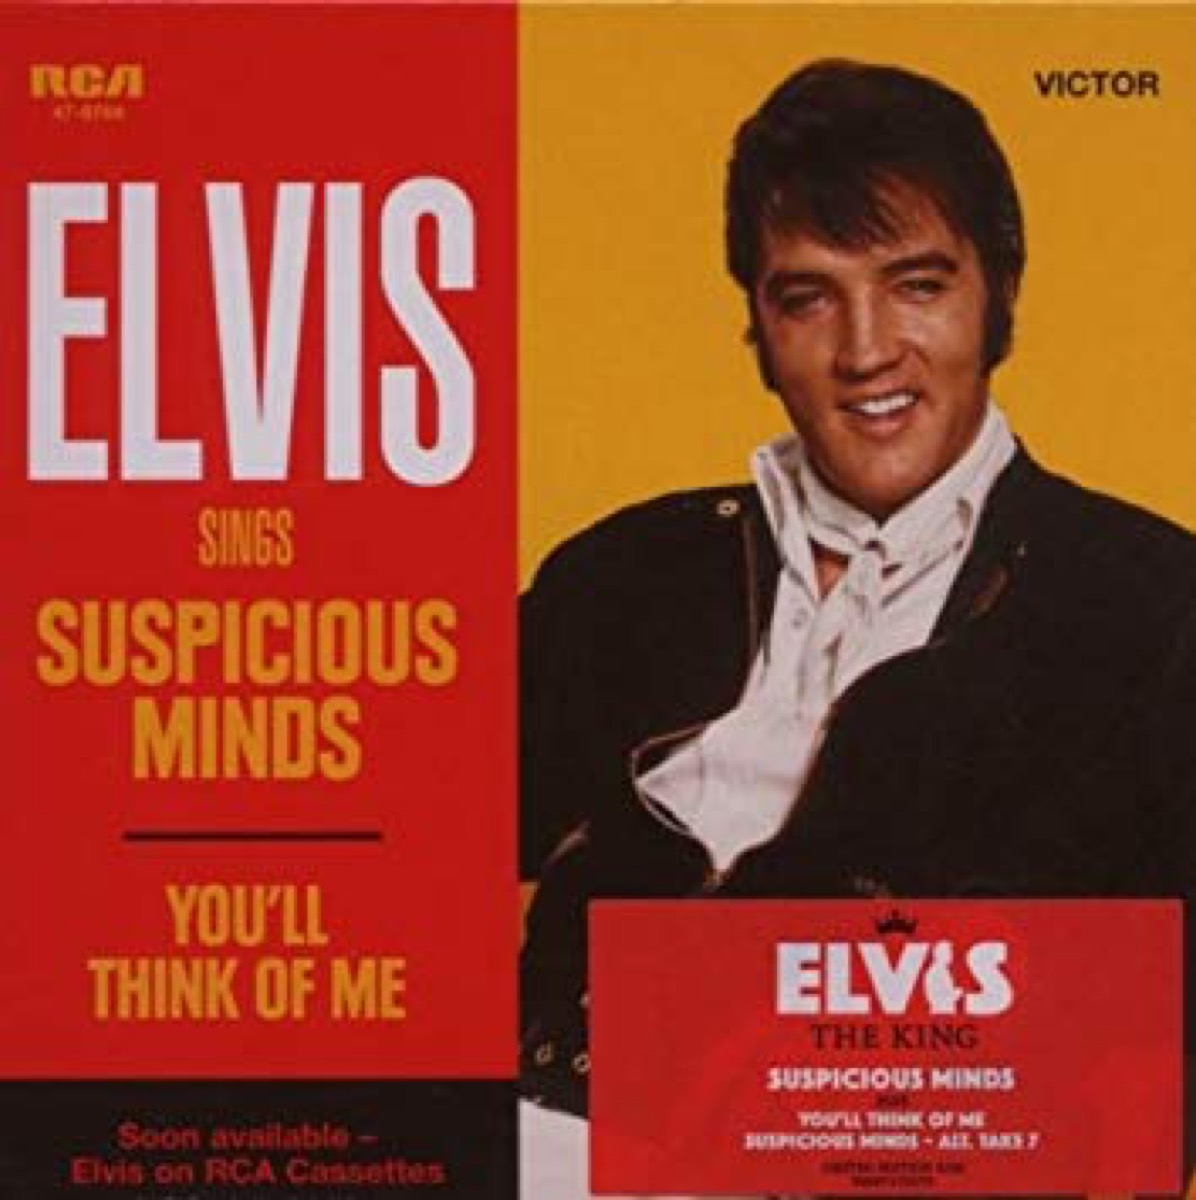 Cover art of Elvis Presley's "Suspicious Minds" single cover, 50 songs from 50 years